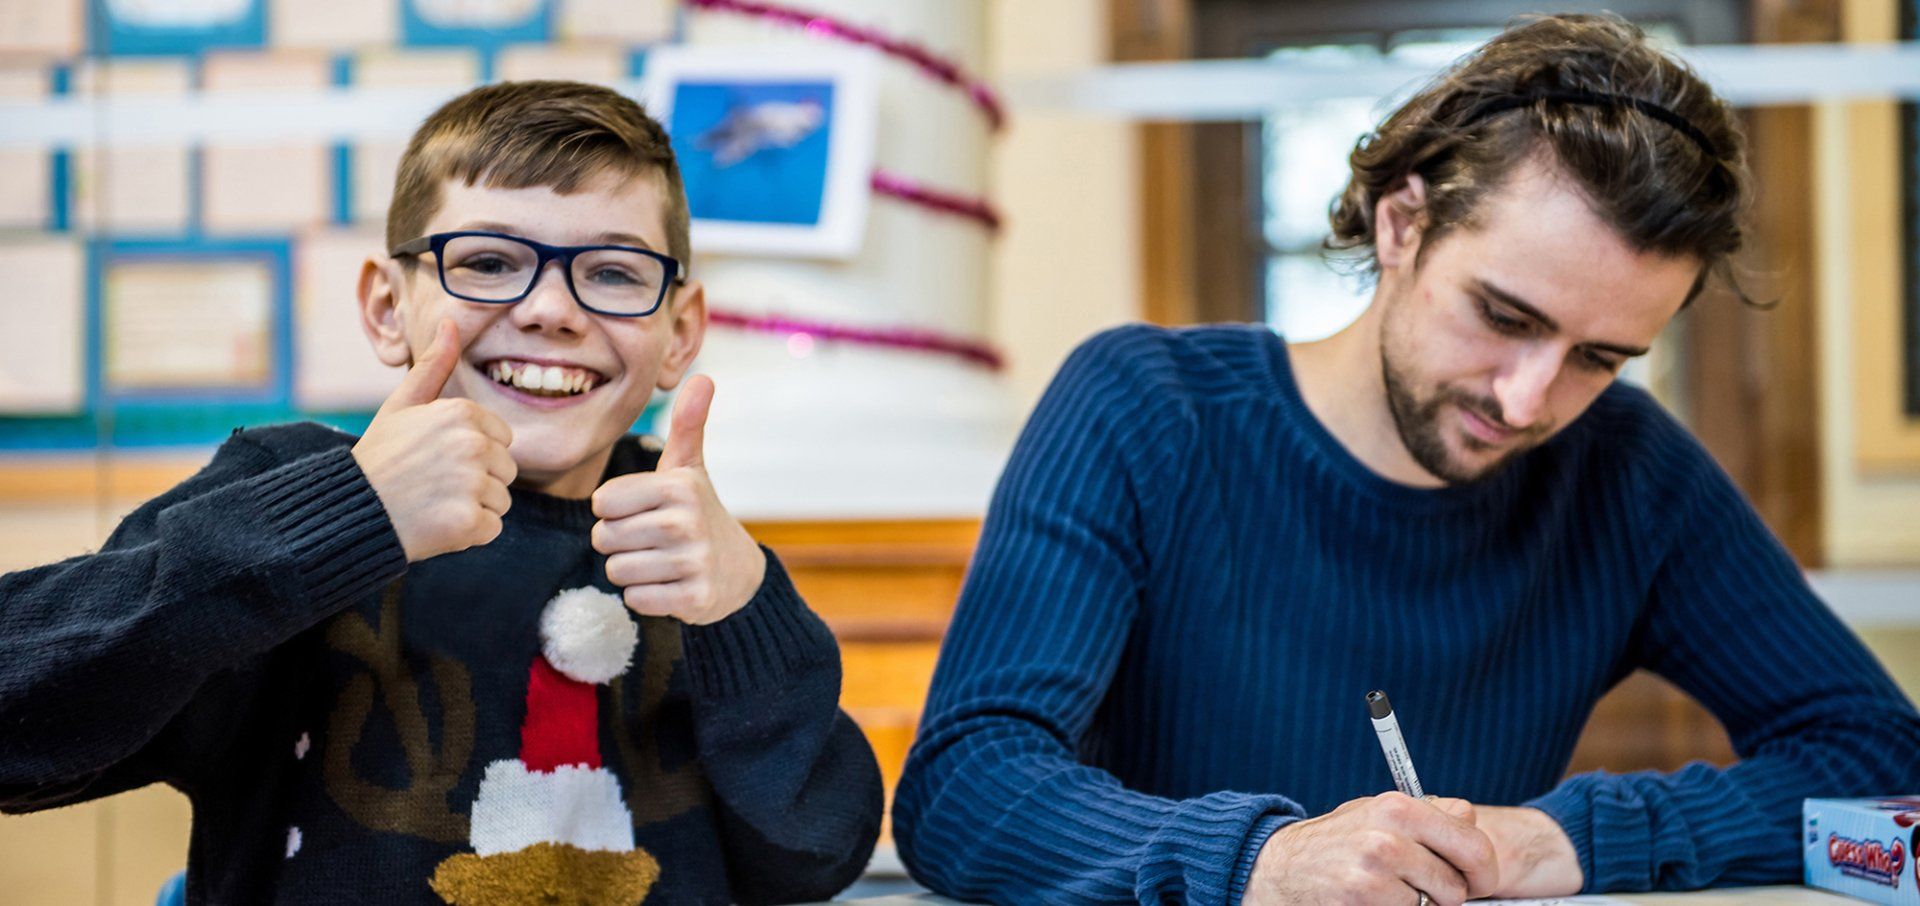 An image of an male child and an adult man sat on a sat. The child is wearing a festive jumper and is smiling directly at the camera with his thumbs up. The adult is wearing a blue jump and is writing on a piece of paper